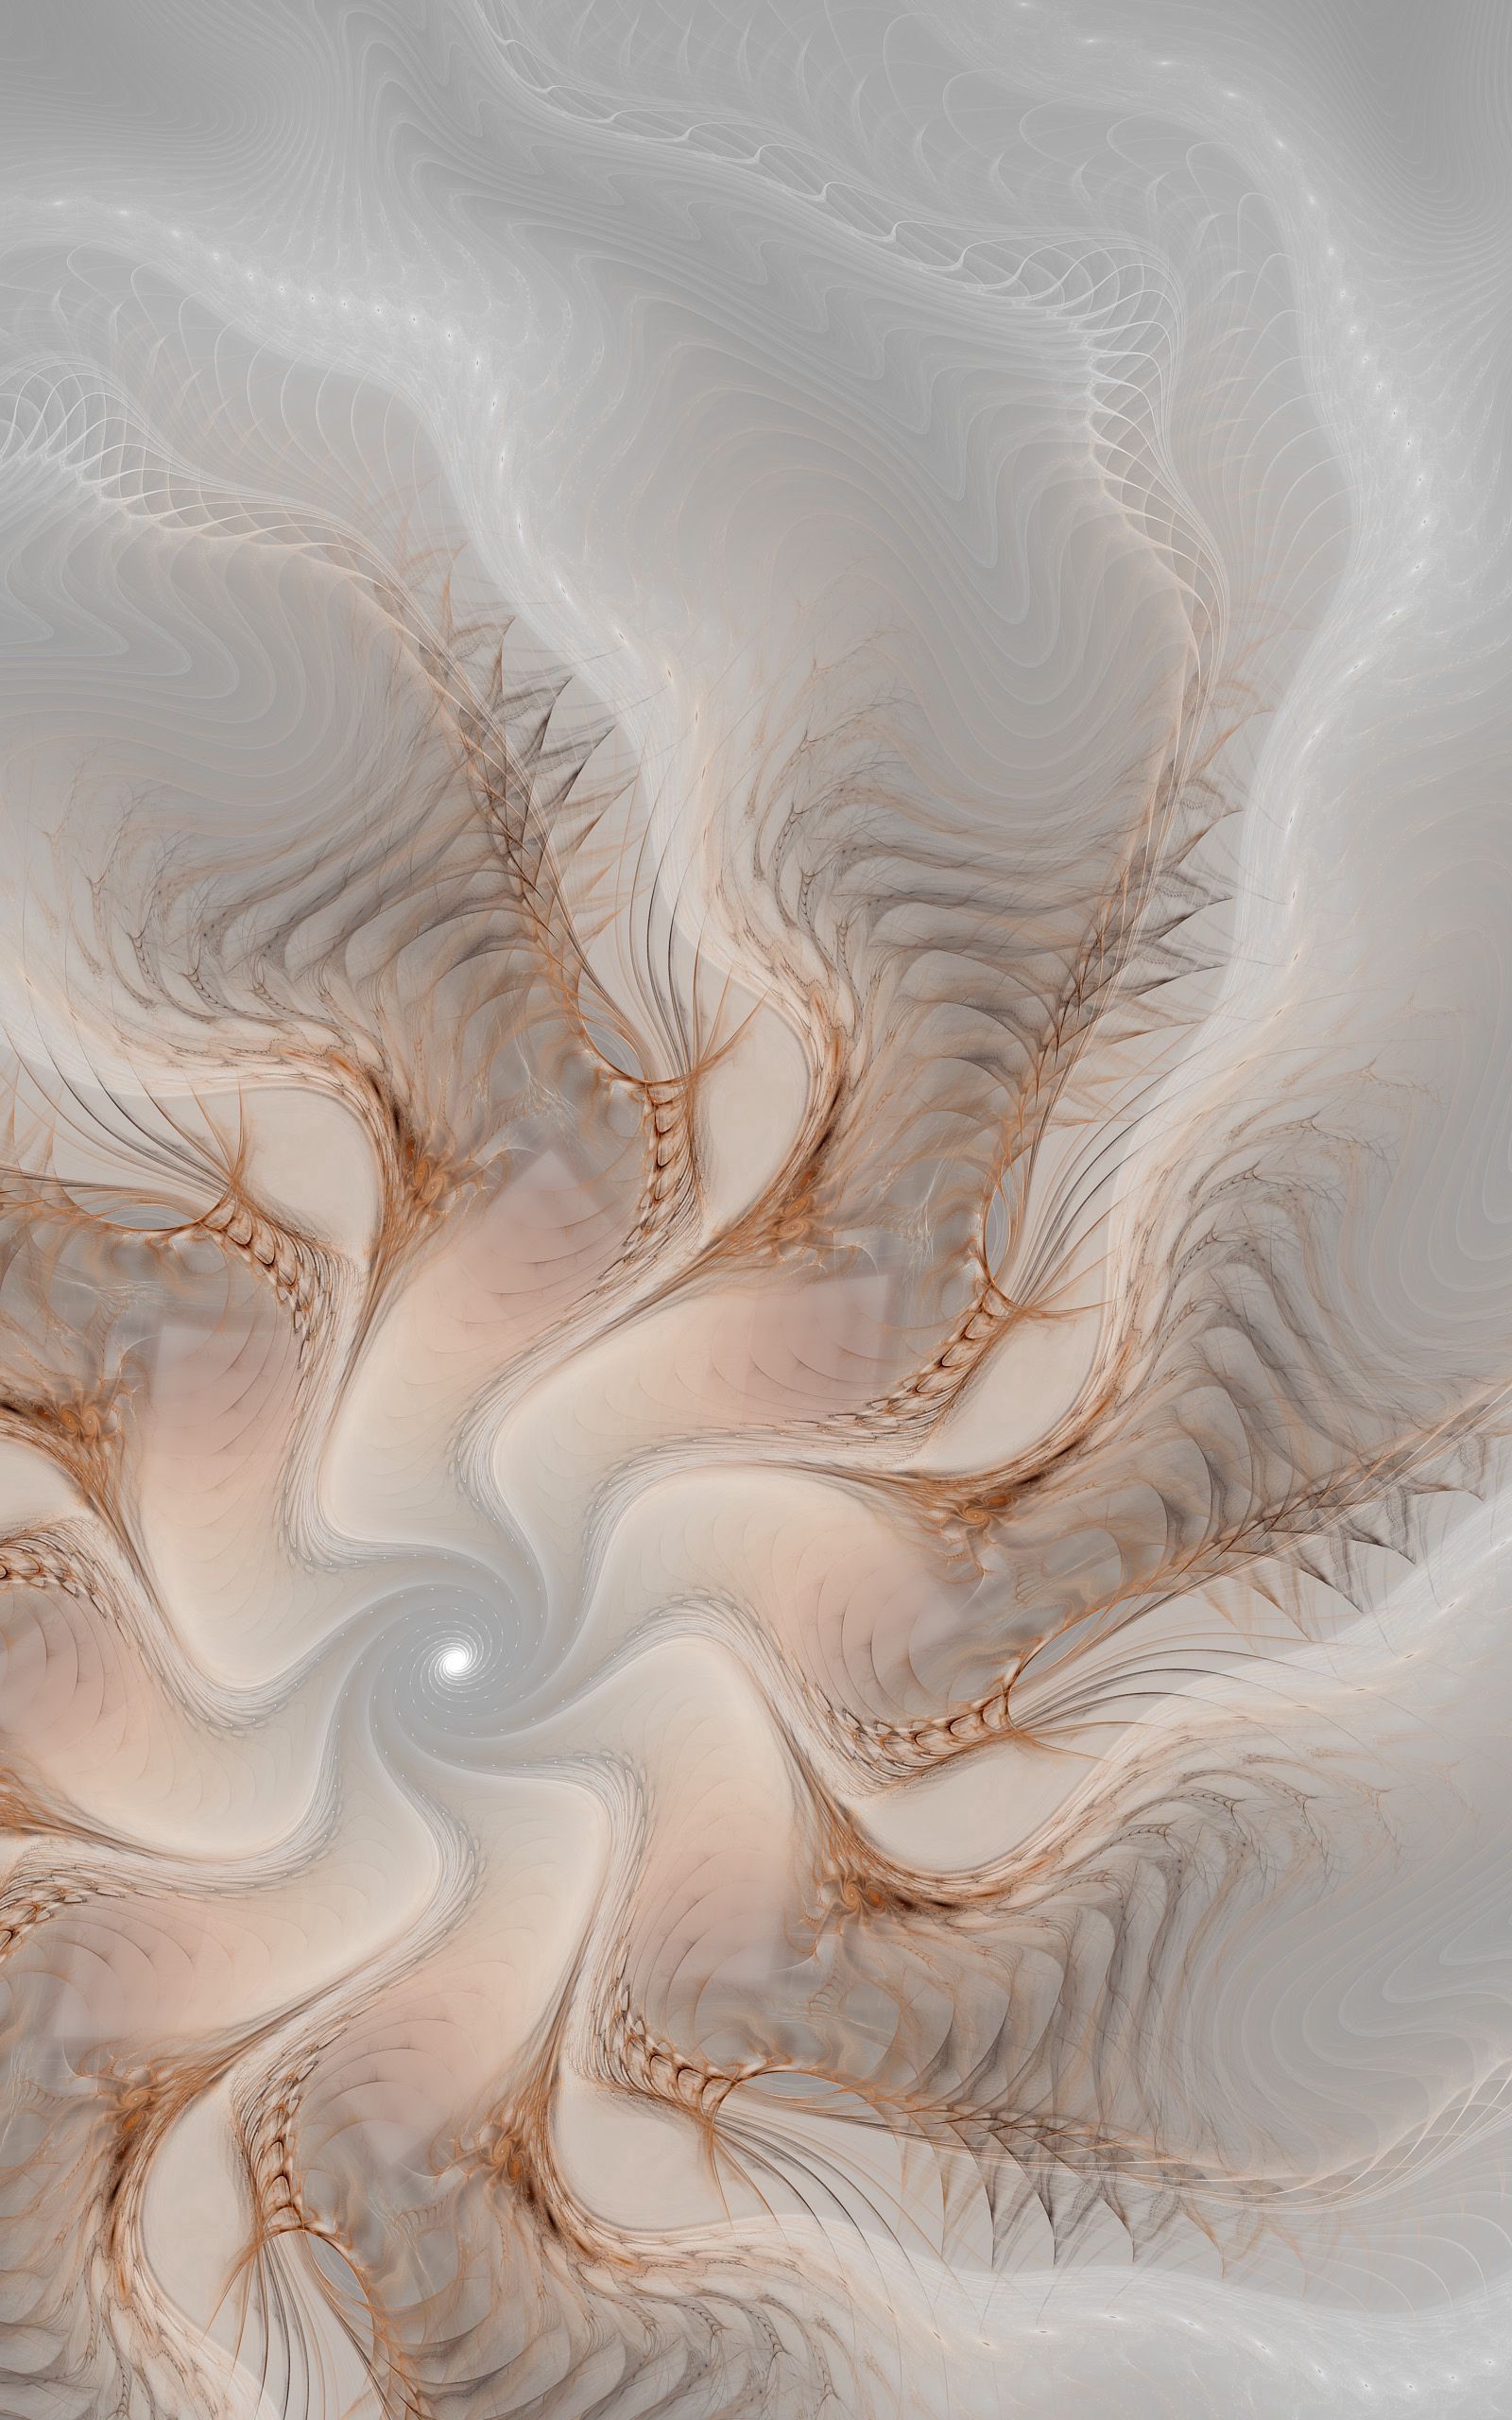 abstract, patterns, fractal, rotation, swirling, involute